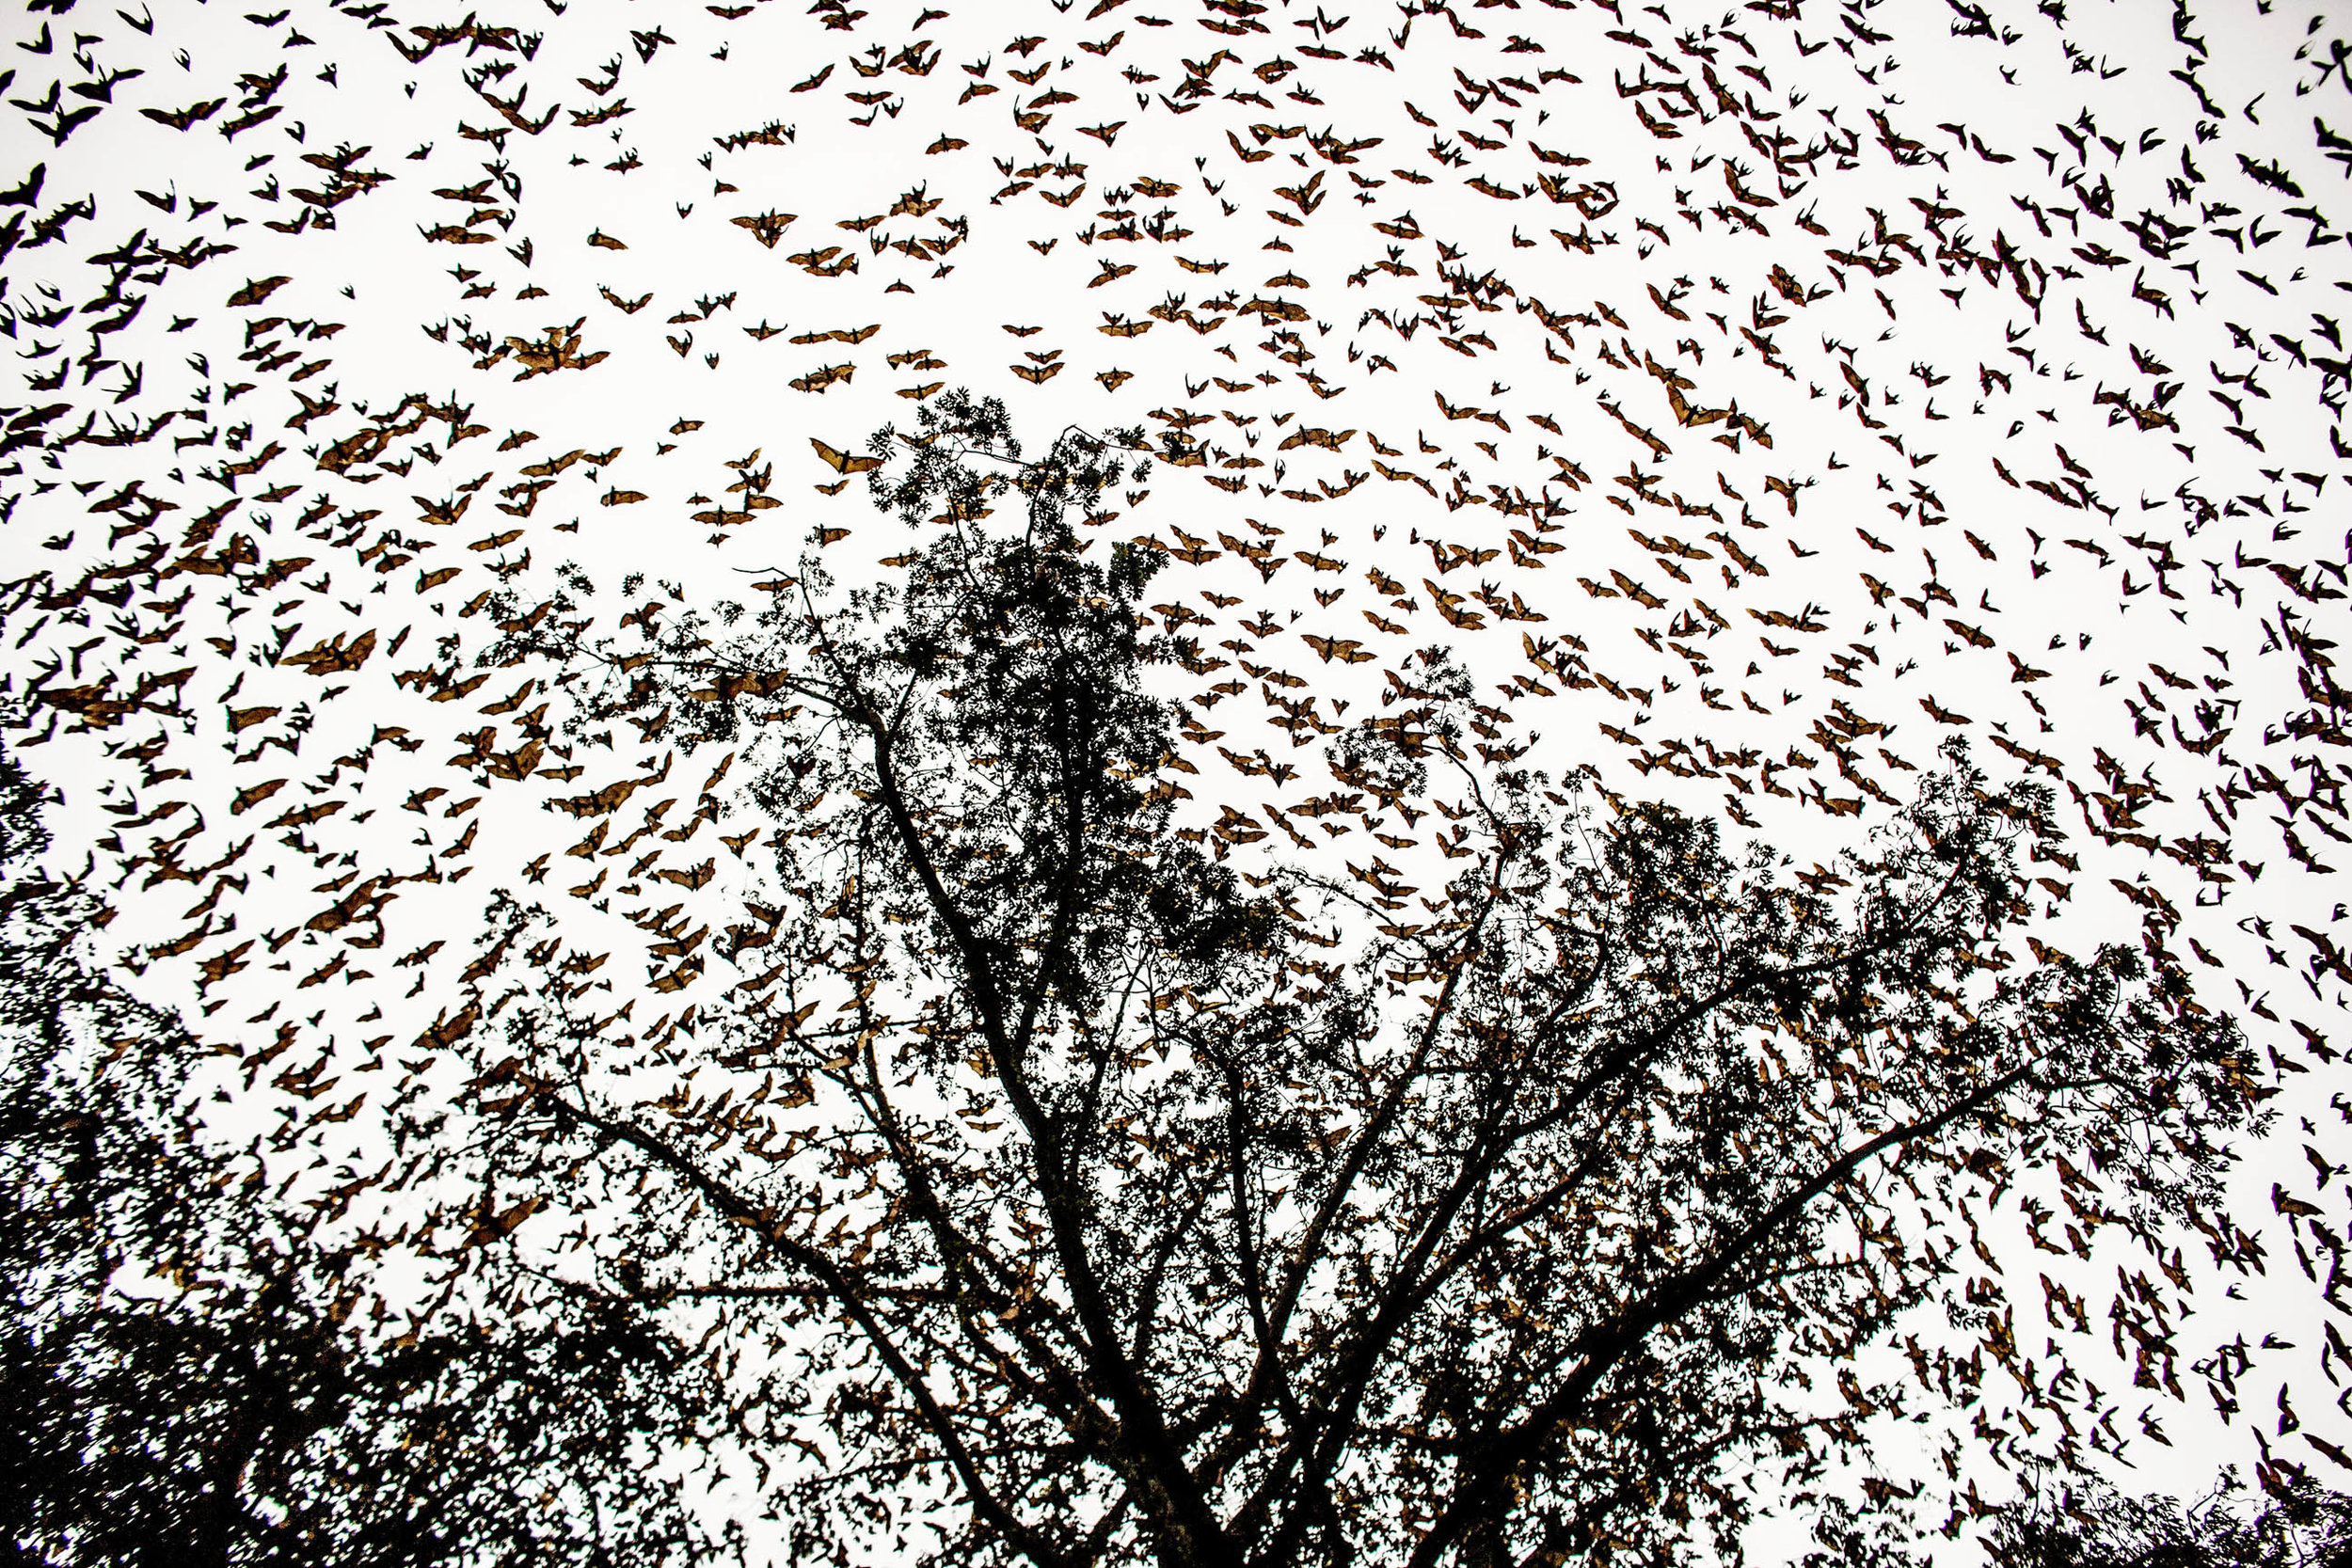  A large colony of fruit bats takes flight out of the trees where they live in the village of Attienkru, outside Bouake, Ivory Coast on Tuesday November 11, 2014. Three species of fruit bats have historically been suspected of being the reservoir hos